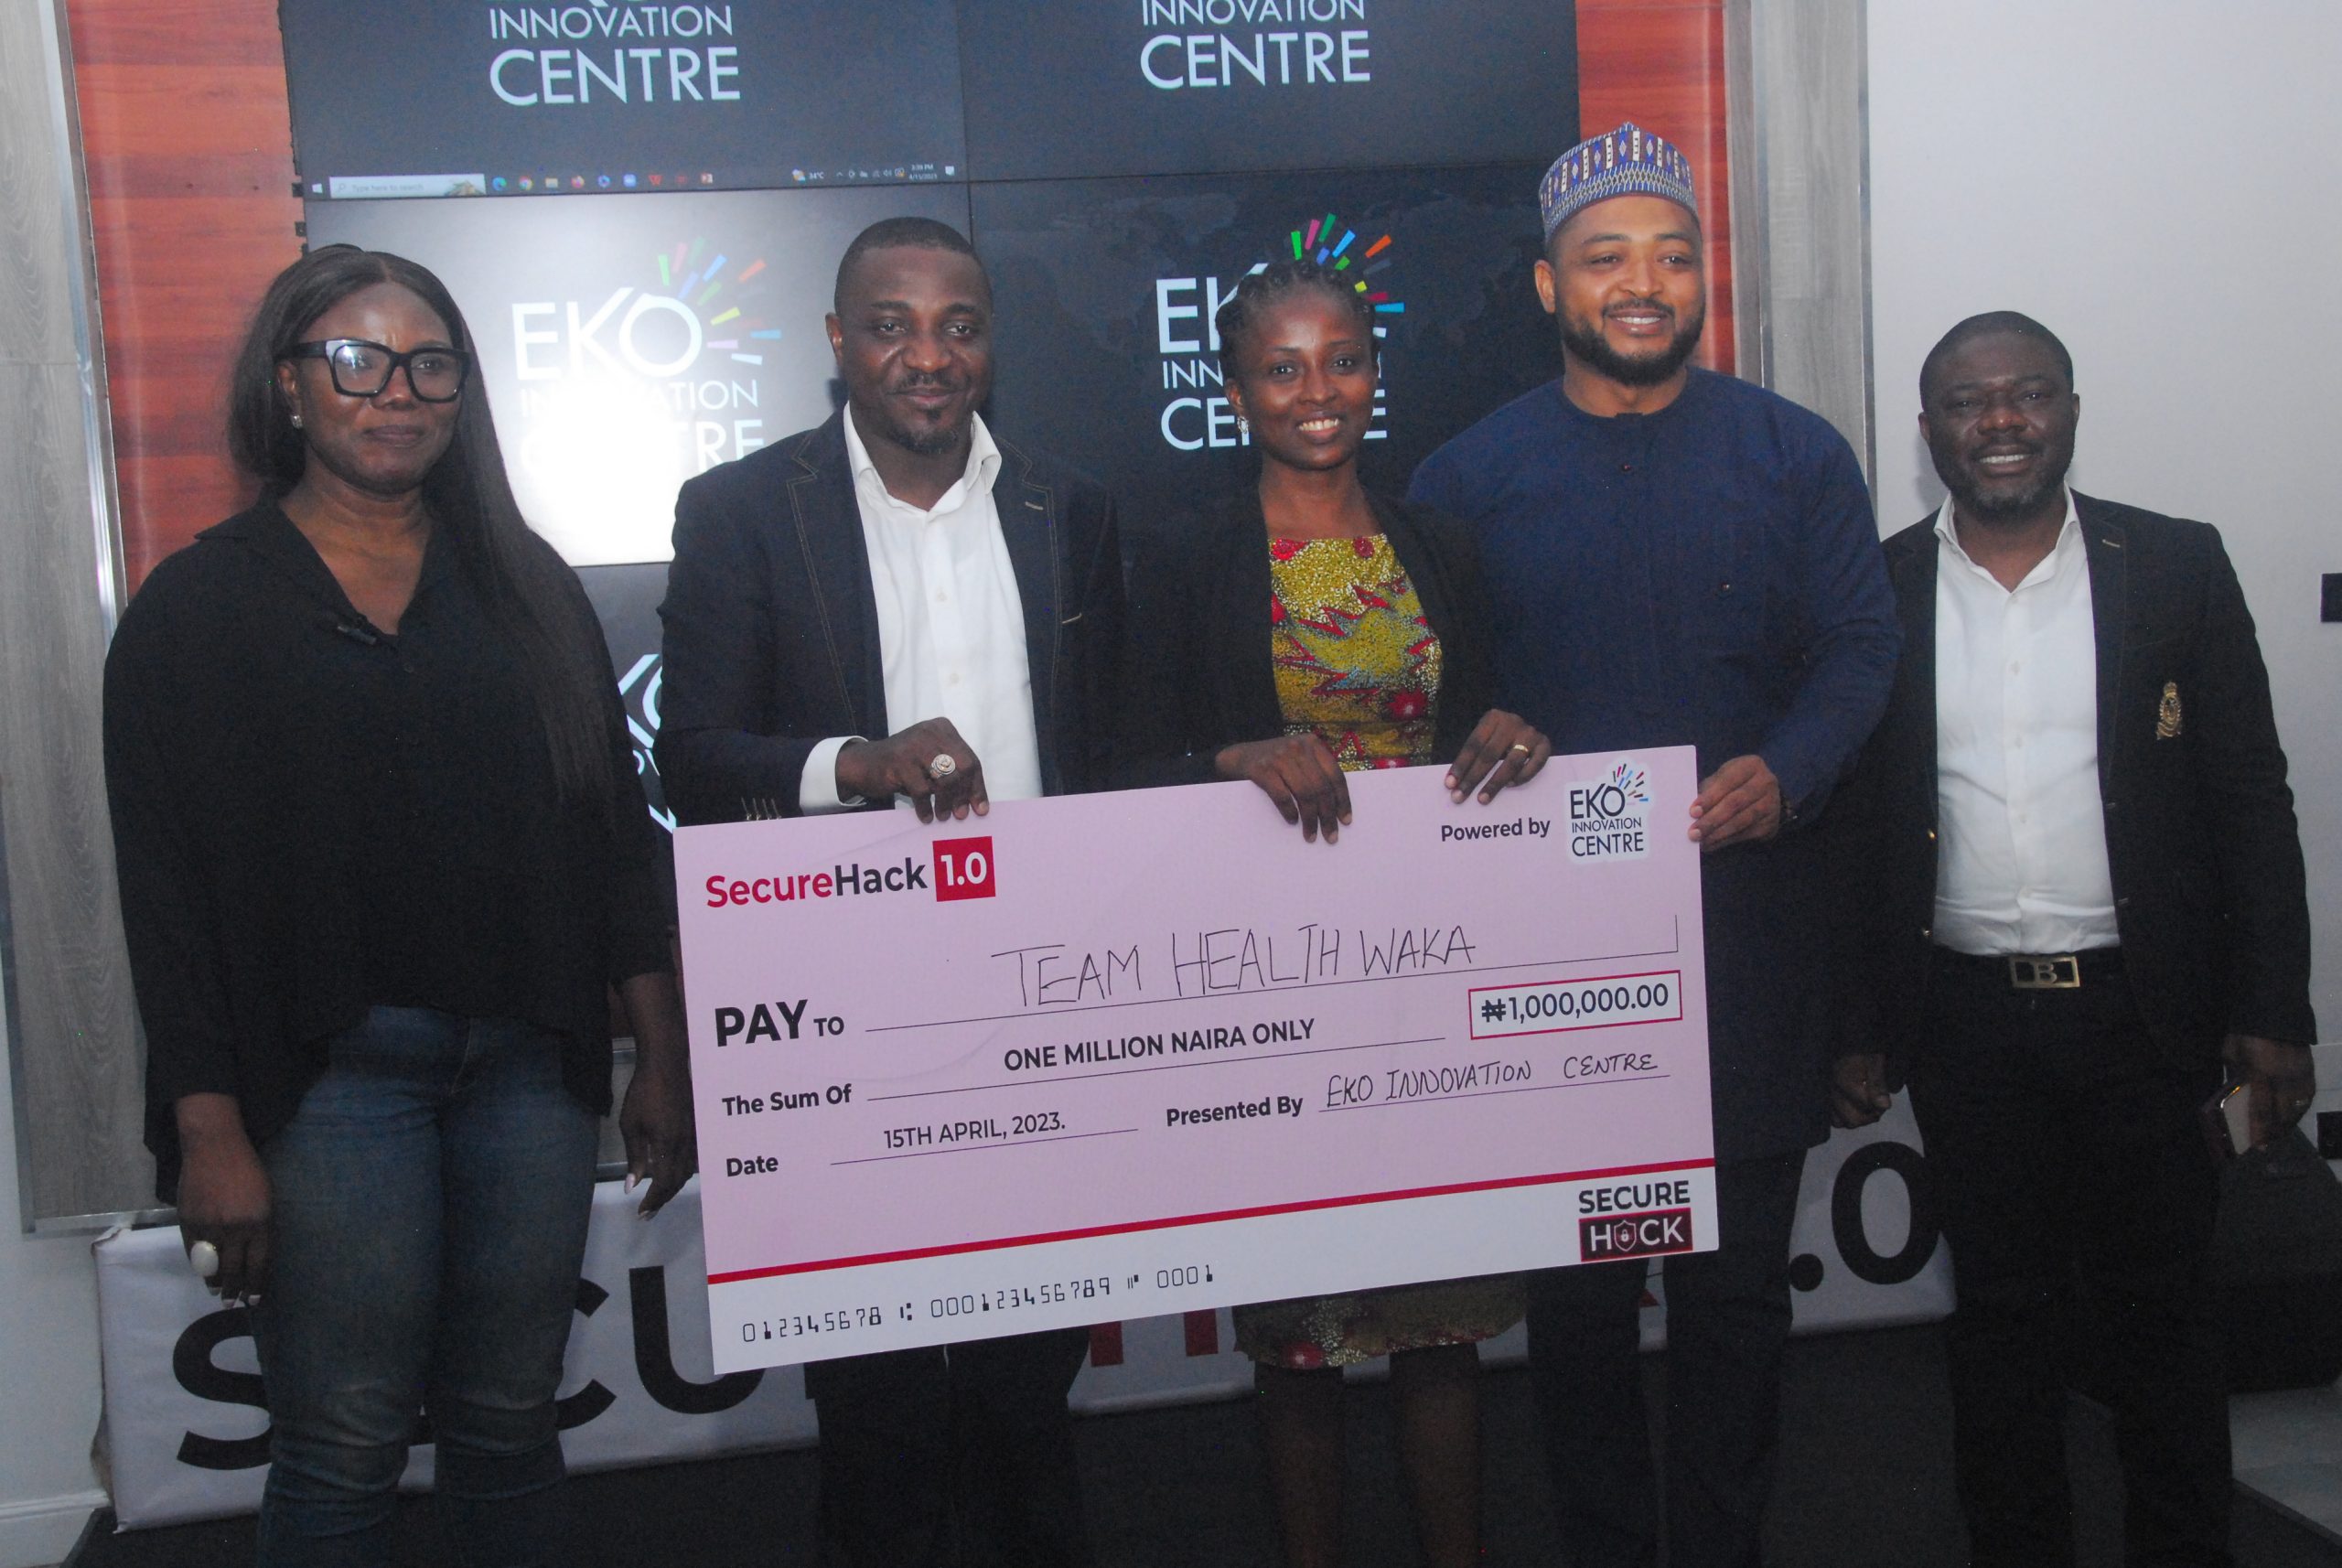 L-R: Ayodele Olojede, Group Head, Emerging Businesses Africa, Access Bank (Final Juror); Victor Afolabi, Founder Eko Innovation Centre and Curator, SecureHack 1.0; Omolola Oluwadara, Product Development Manager, HealthWaka, Winner of SecureHack 1.0; Dr. Obadare Peter Adewale, Co-founder, Digital Encode Limited (Final Juror); and David Arome Ali, Chief Information, Security Officer, Airtel (Final Juror) at the Grand Finale of SecureHack 1.0 held at the Eko Innovation Centre, Ikoyi, Lagos, on Saturday, April 15, 2023.